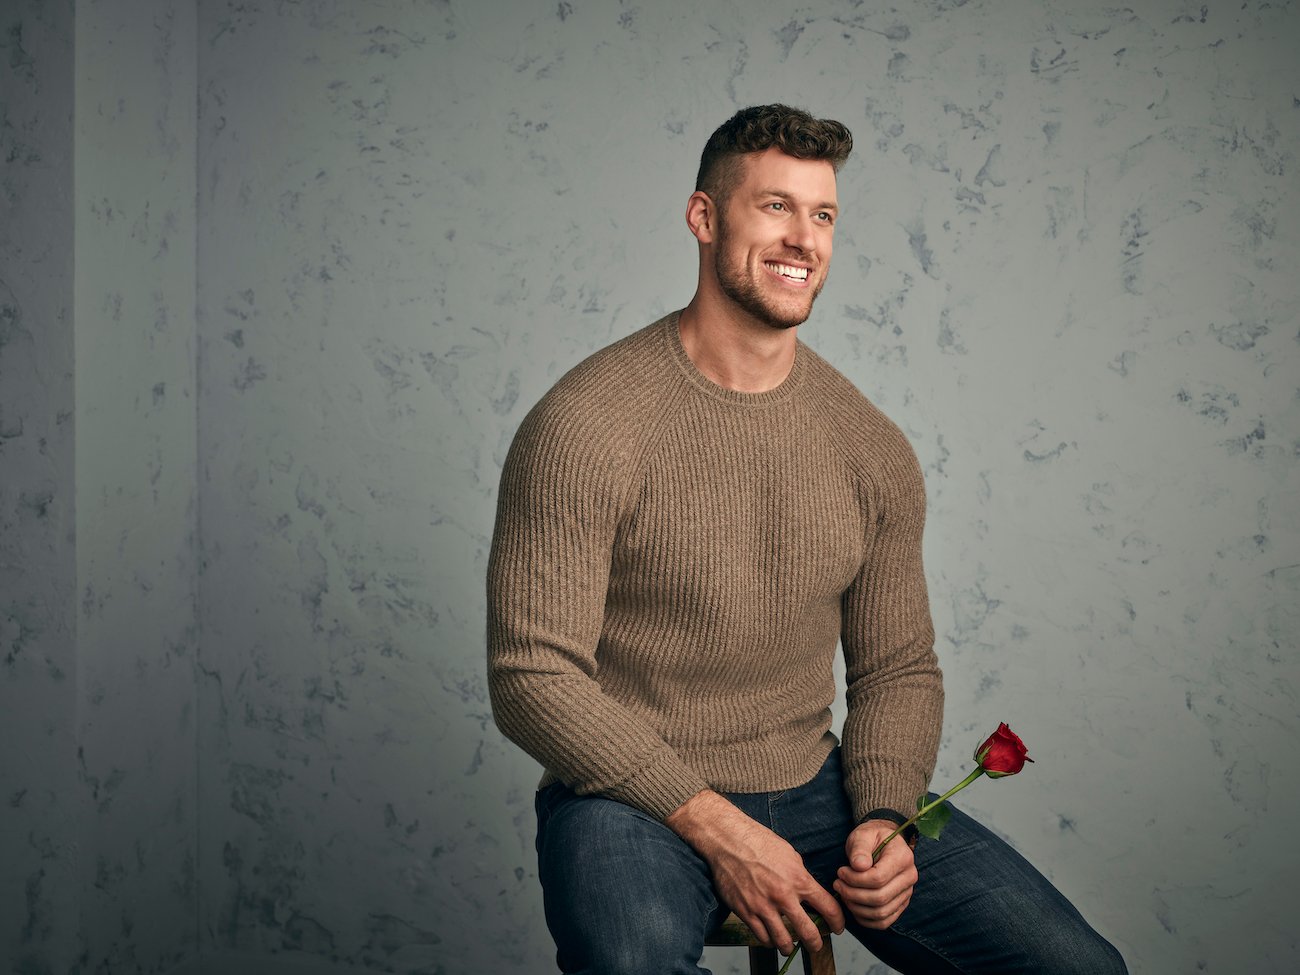 'The Bachelor' Clayton Echard poses holding a rose